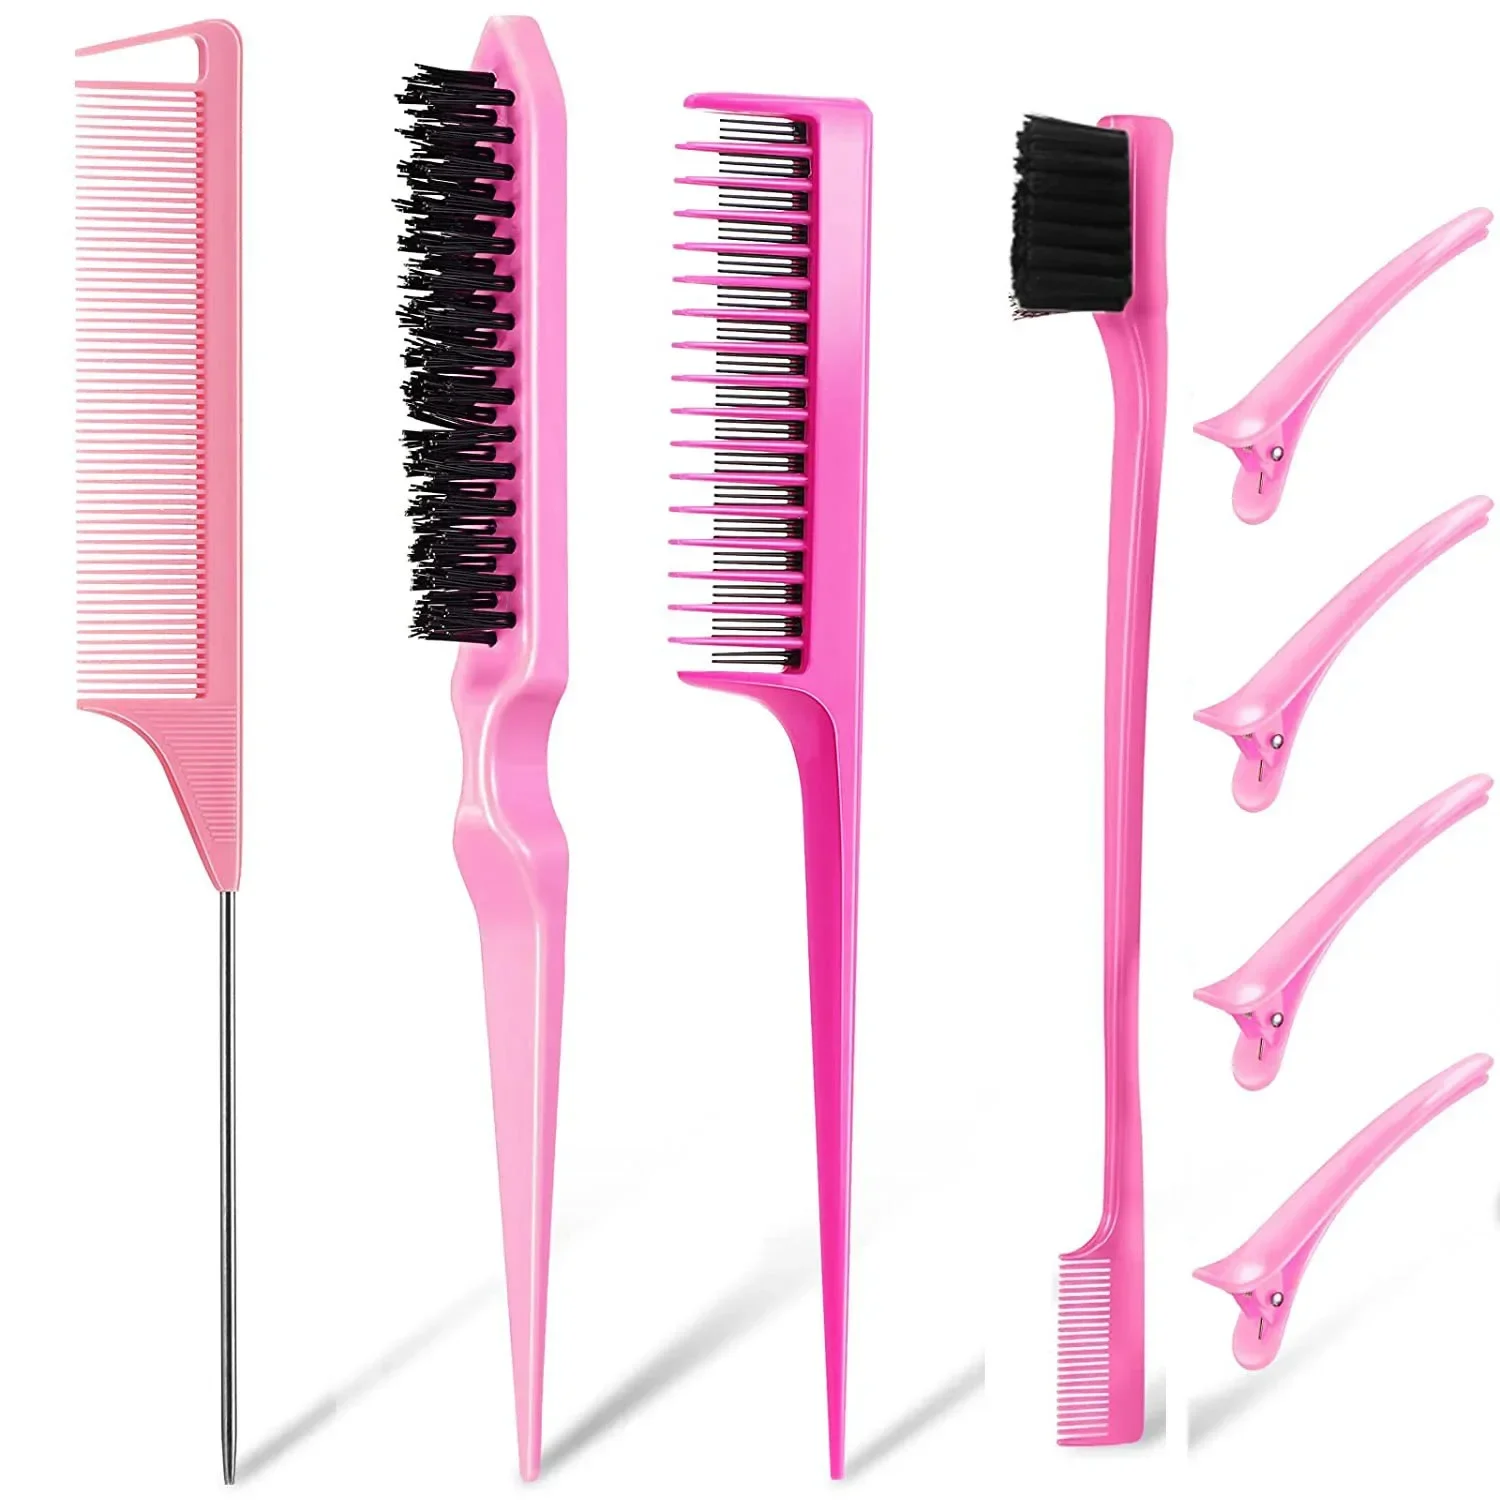 

Comb Set Hair Styling Special Pointy Tail Beating Double Headed Brush Eyebrow Long Barber Makeup Updo Children Hair Salon Tools